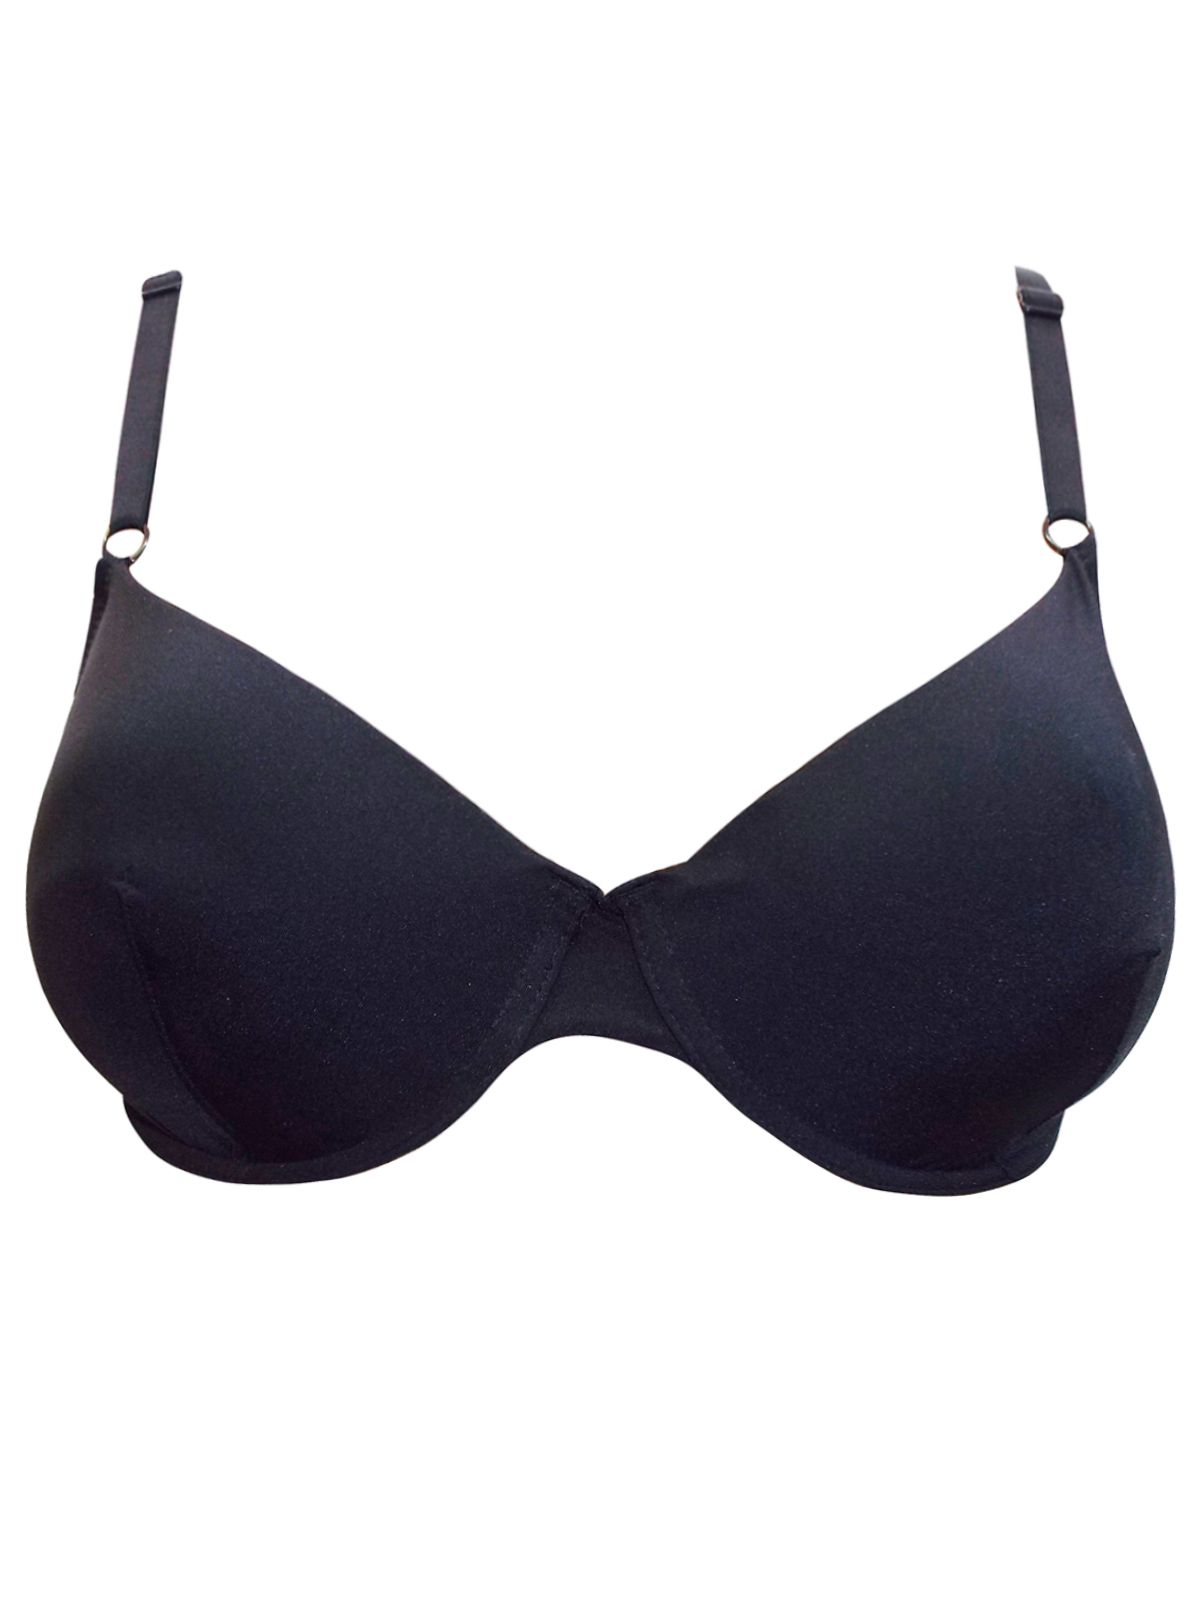 BLACK Padded & Wired T-Shirt Bra - Size 38 (C-D)